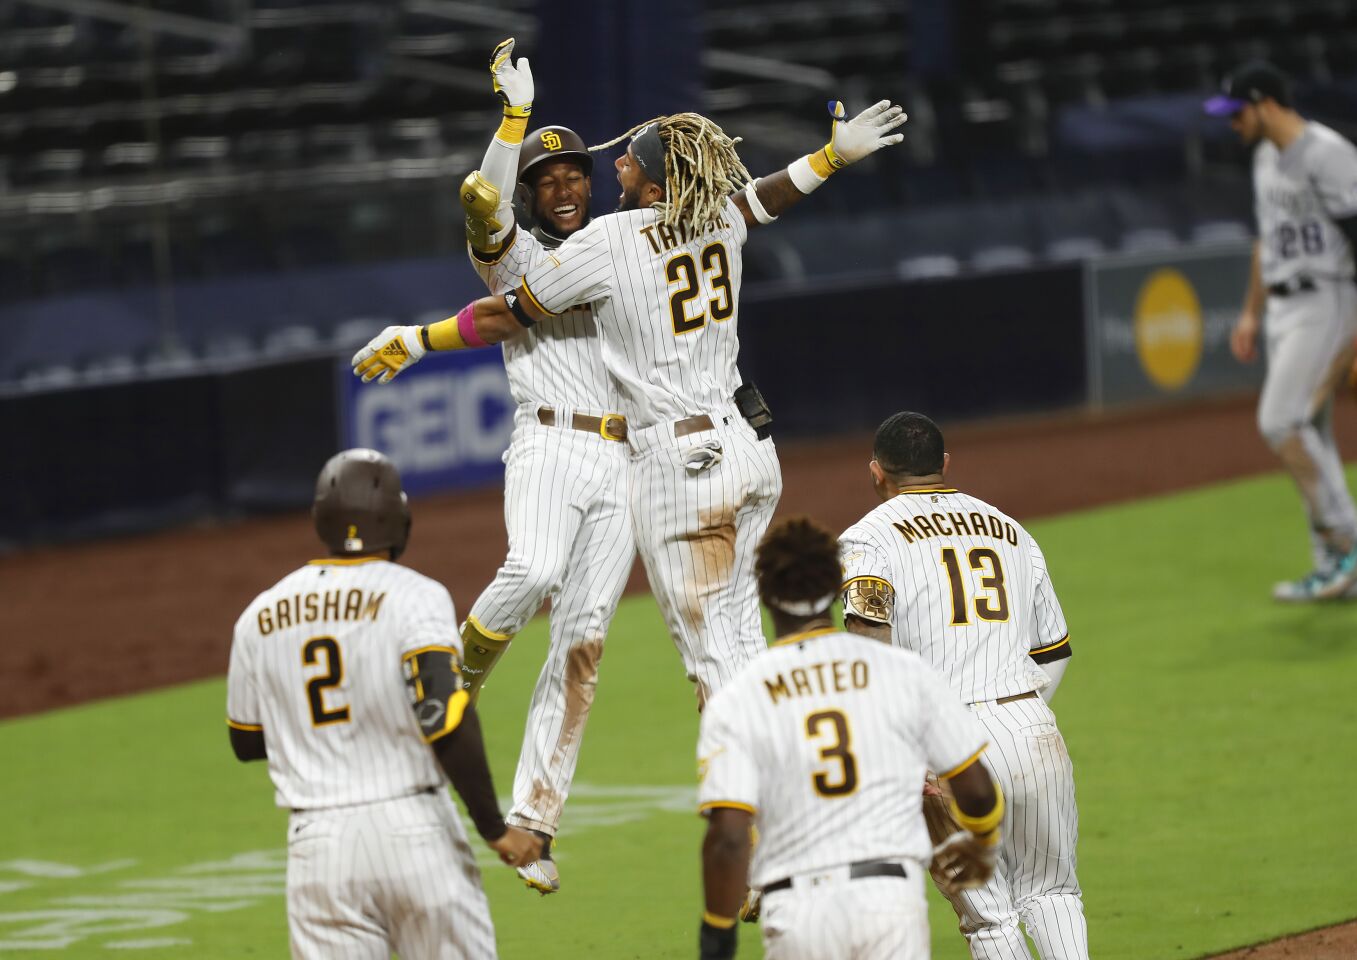 San Diego Padres Jurickson Profar celebrates his game-winning hit with Fernando Tatis Jr., right, in the bottom of the 9th inning to beat the Colorado Rockies 1-0.